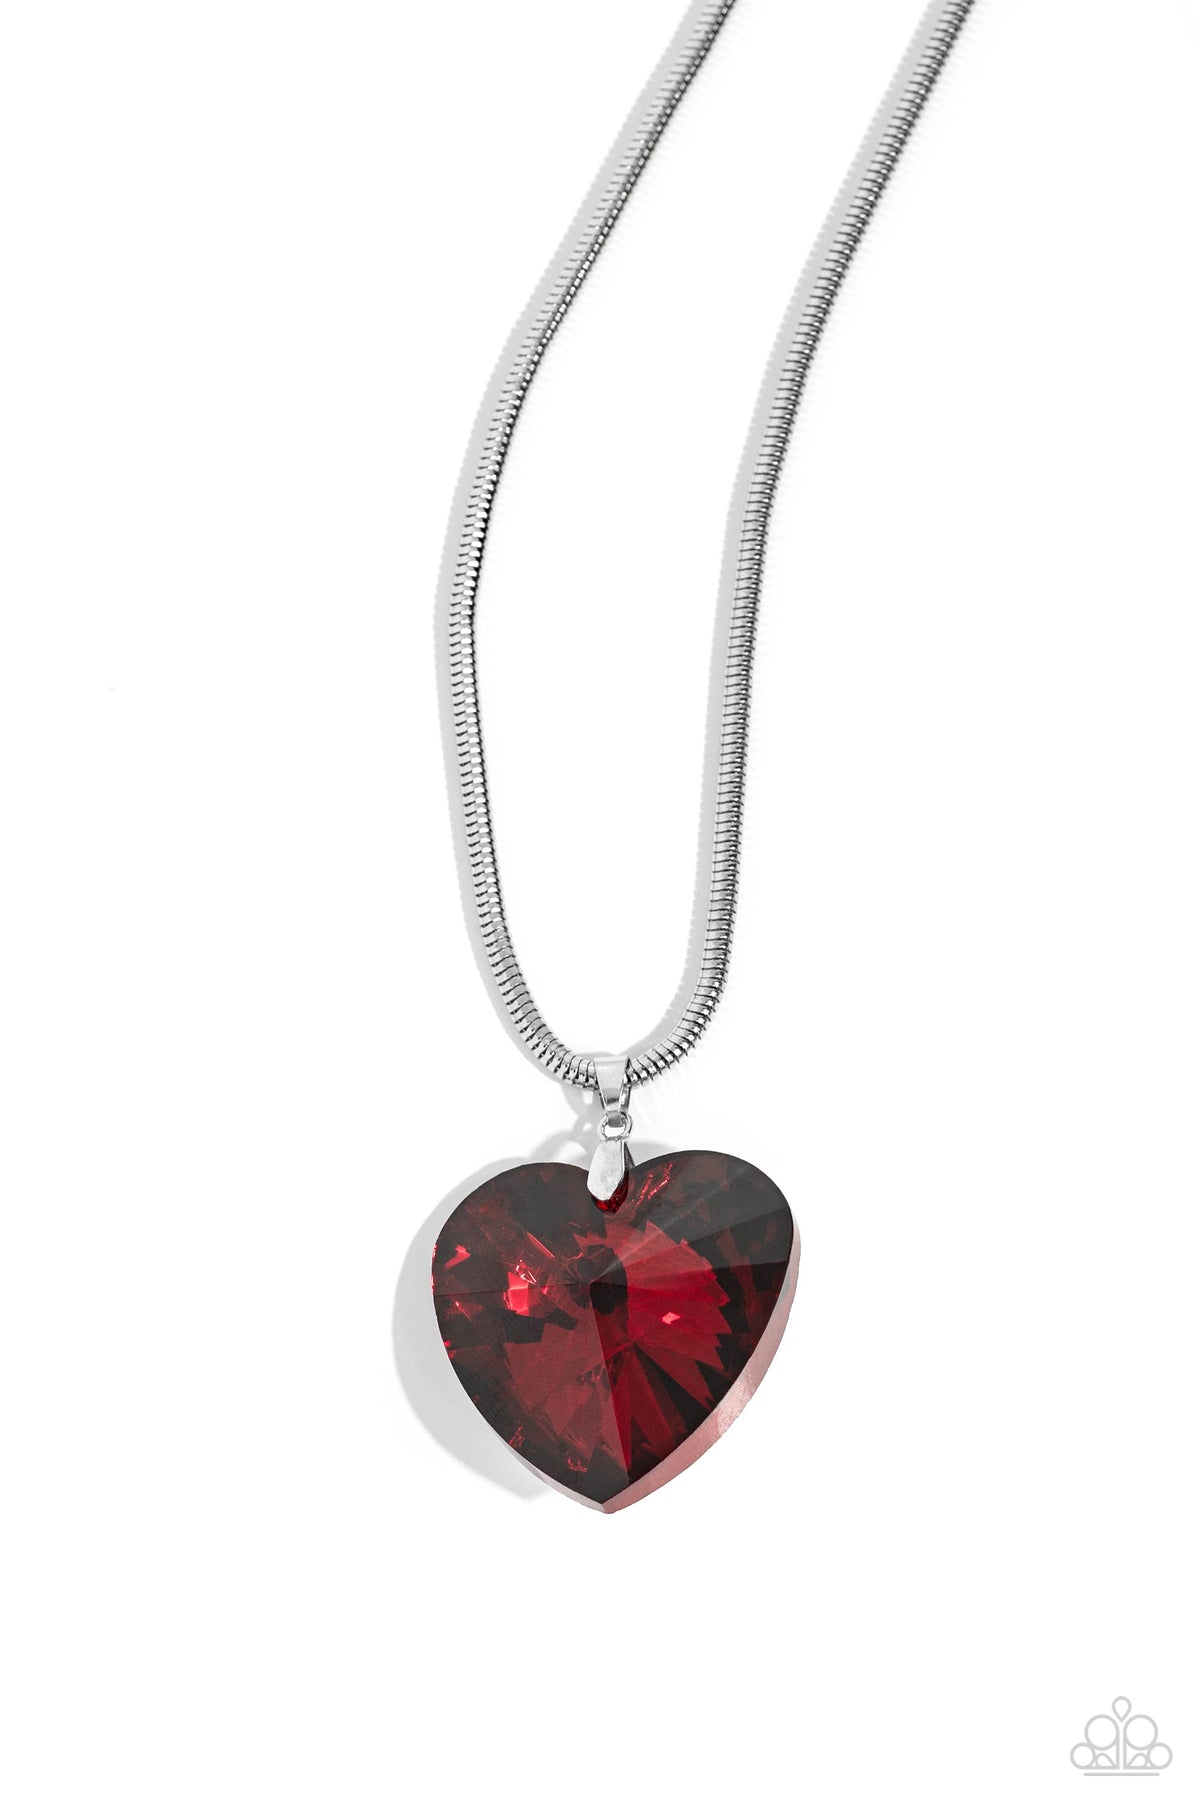 Parting is Such Sweet Sorrow Red Heart Necklace - Paparazzi Accessories- lightbox - CarasShop.com - $5 Jewelry by Cara Jewels